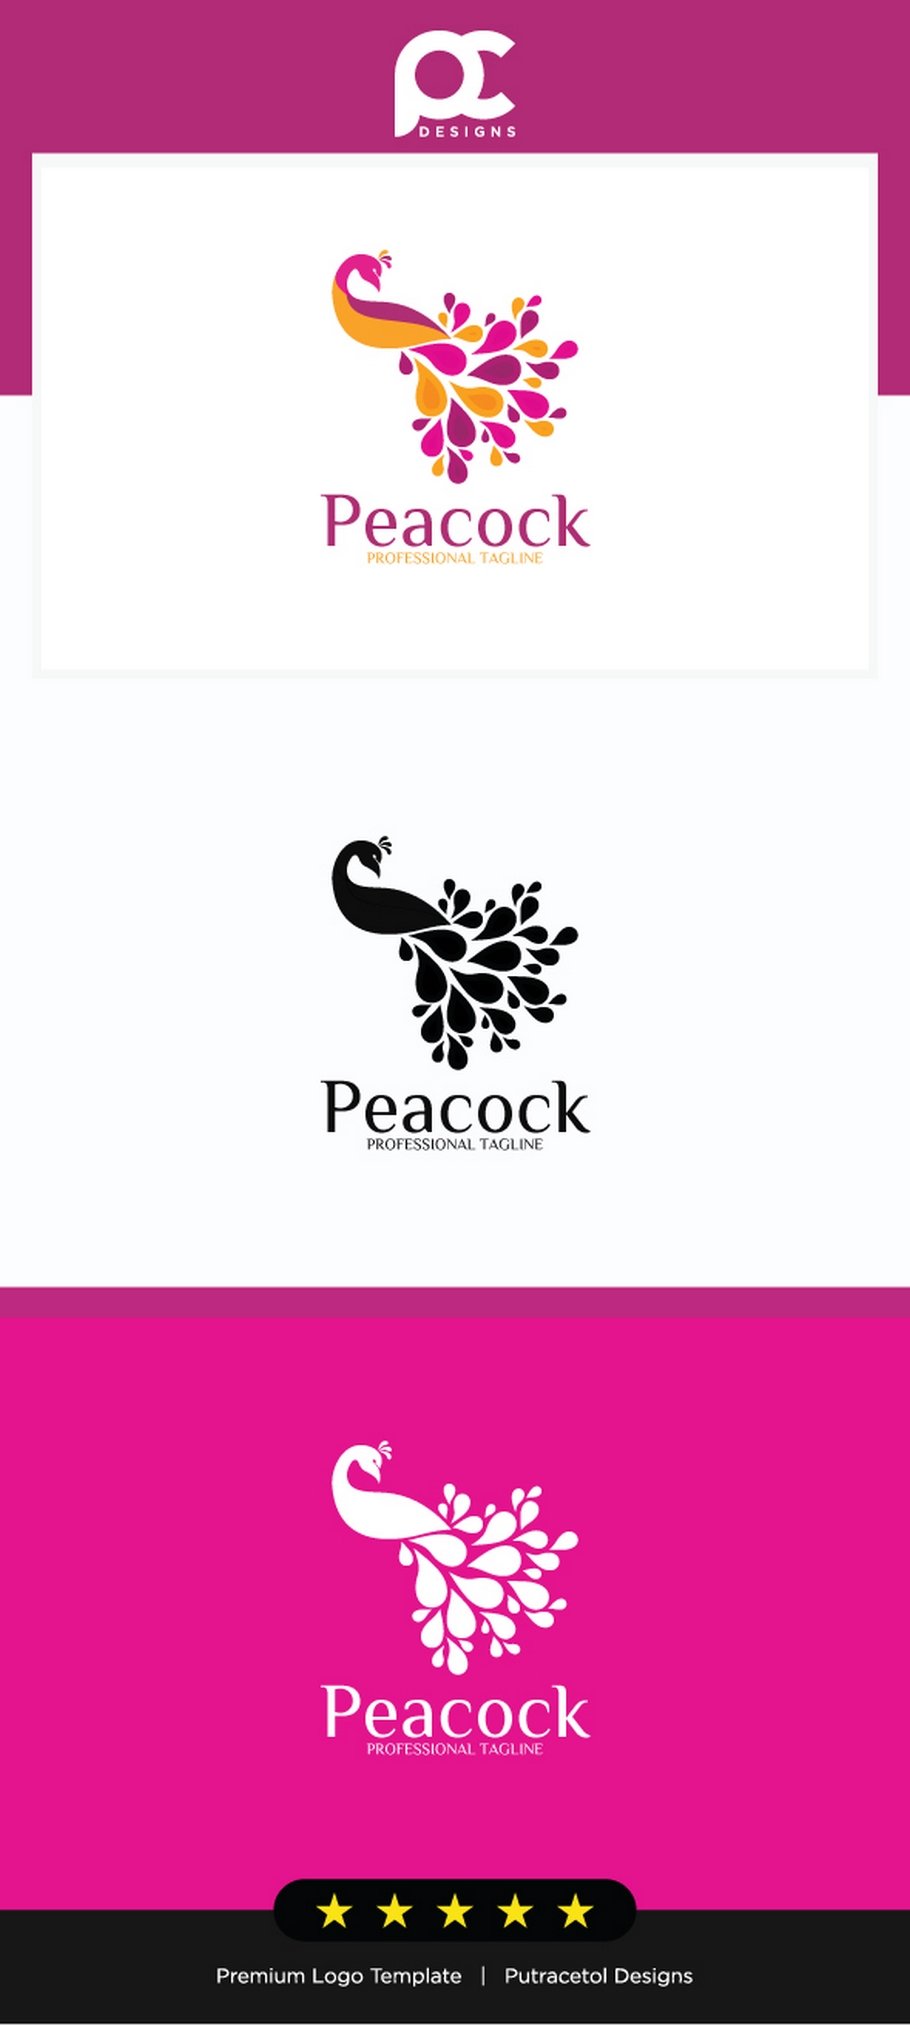 Peacock Logo Template cover image.